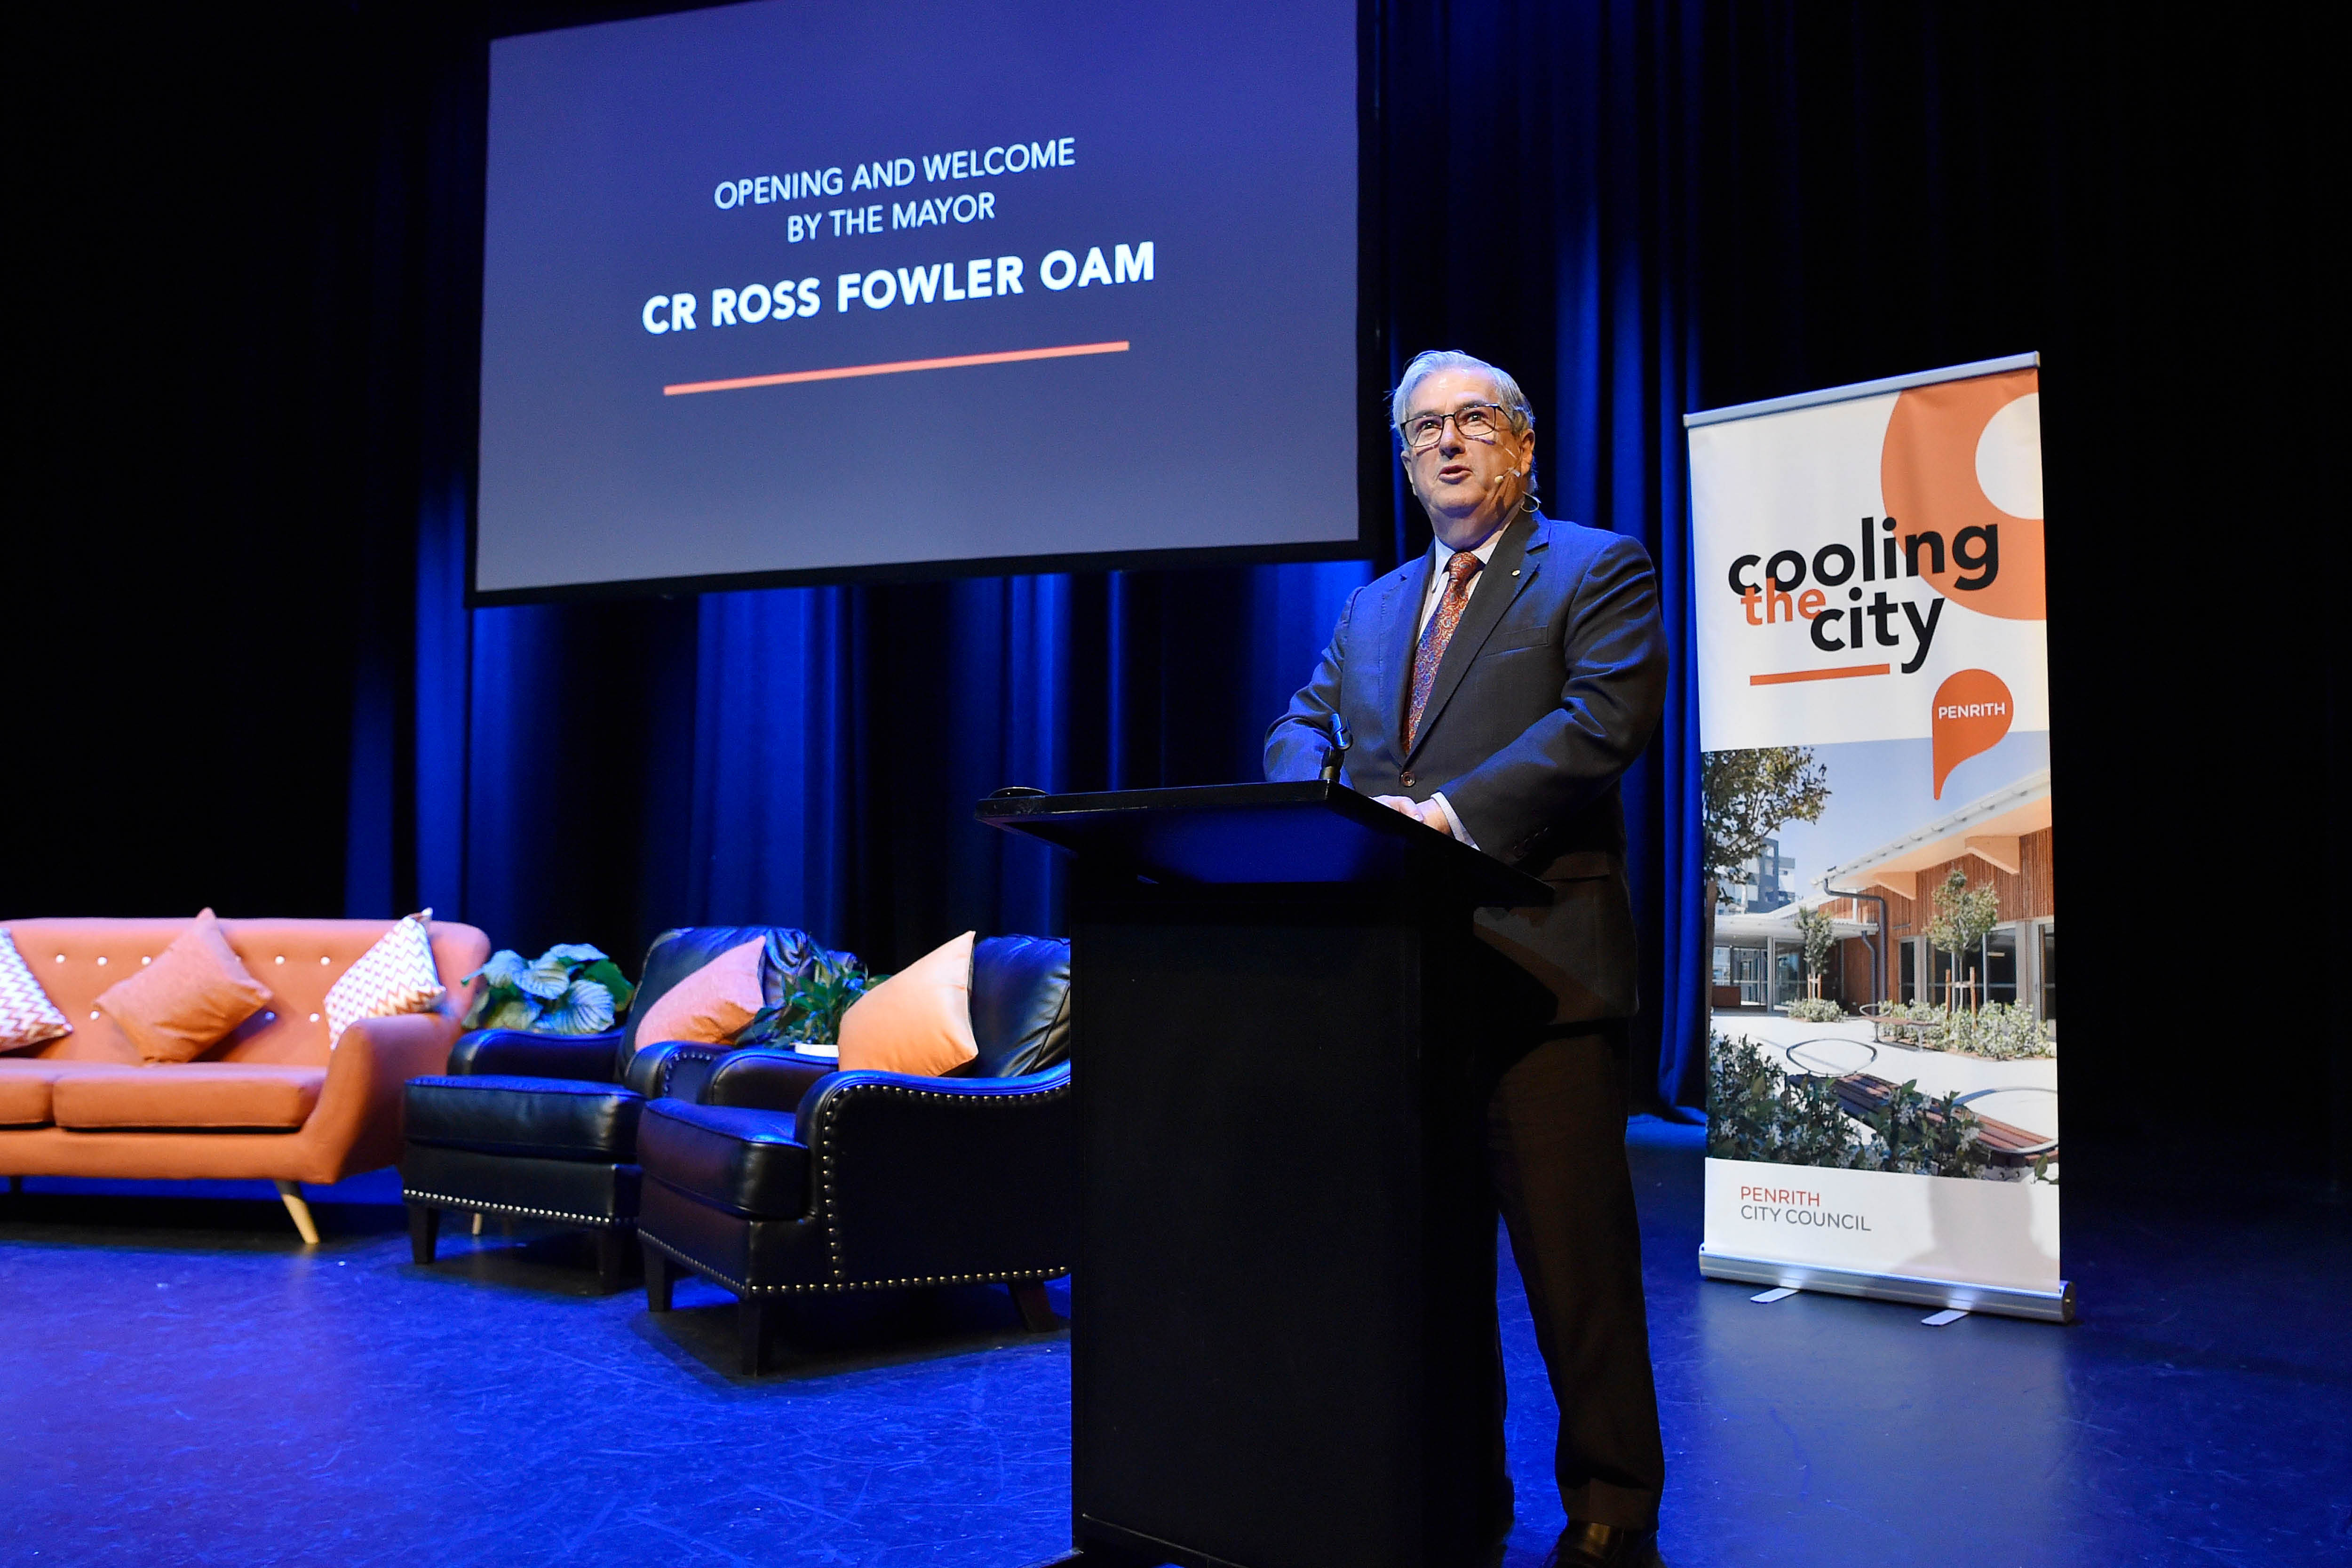 Penrith Mayor Cr Ross Fowler OAM opening proceedings at the Cooling the Masterclass